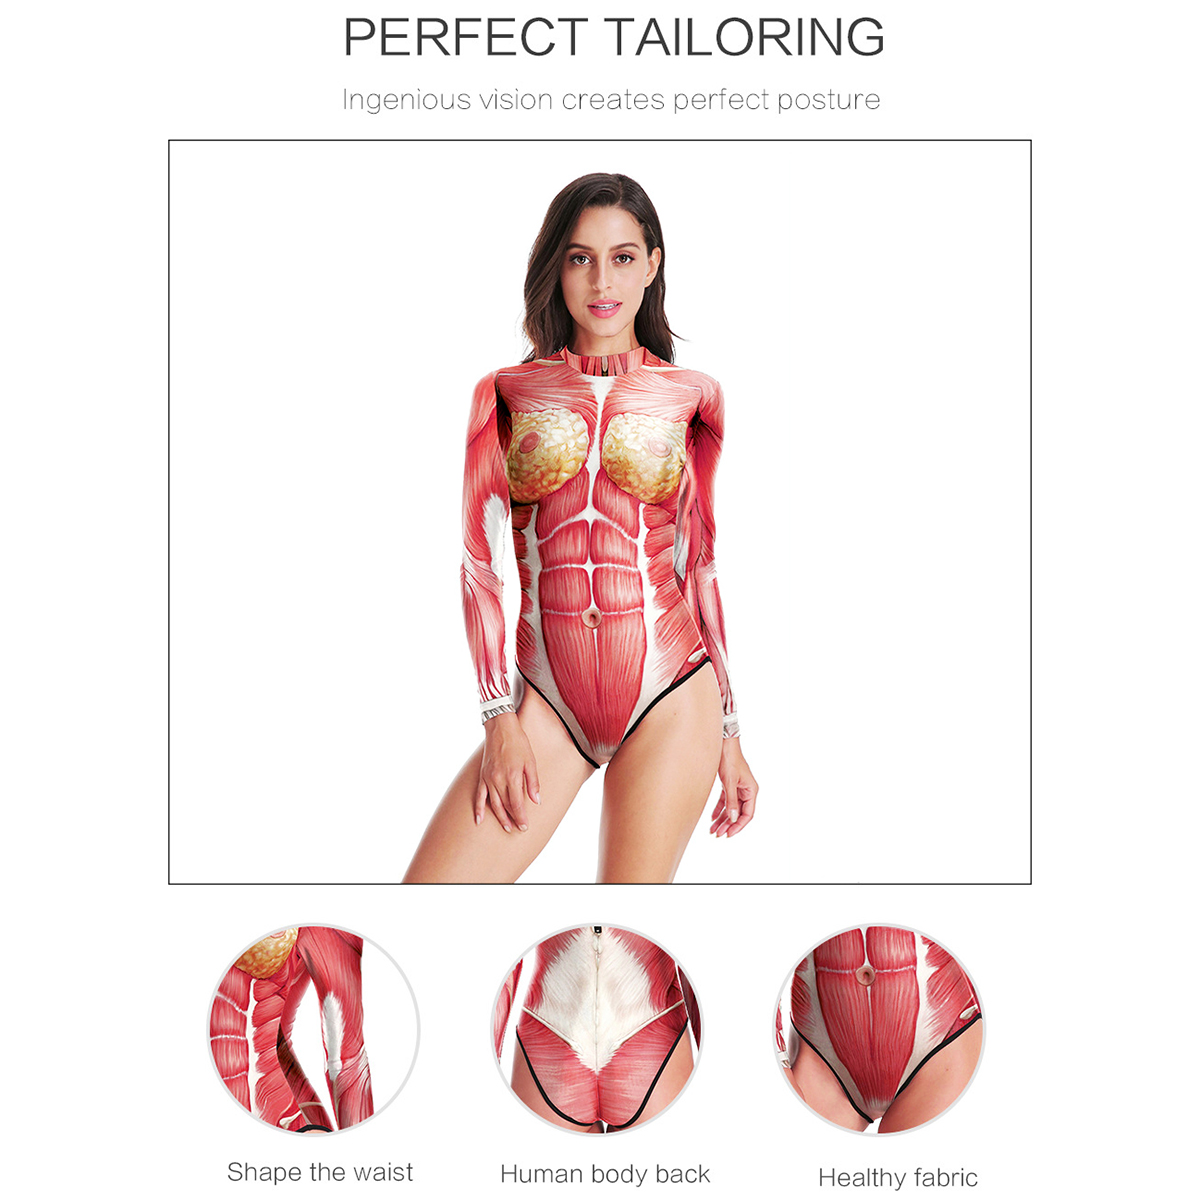 Womens-Human-Organs-Swimwear-Cosplay-Costume-Swimsuit-Bathing-Suit-Party-Clothes-1623848-2